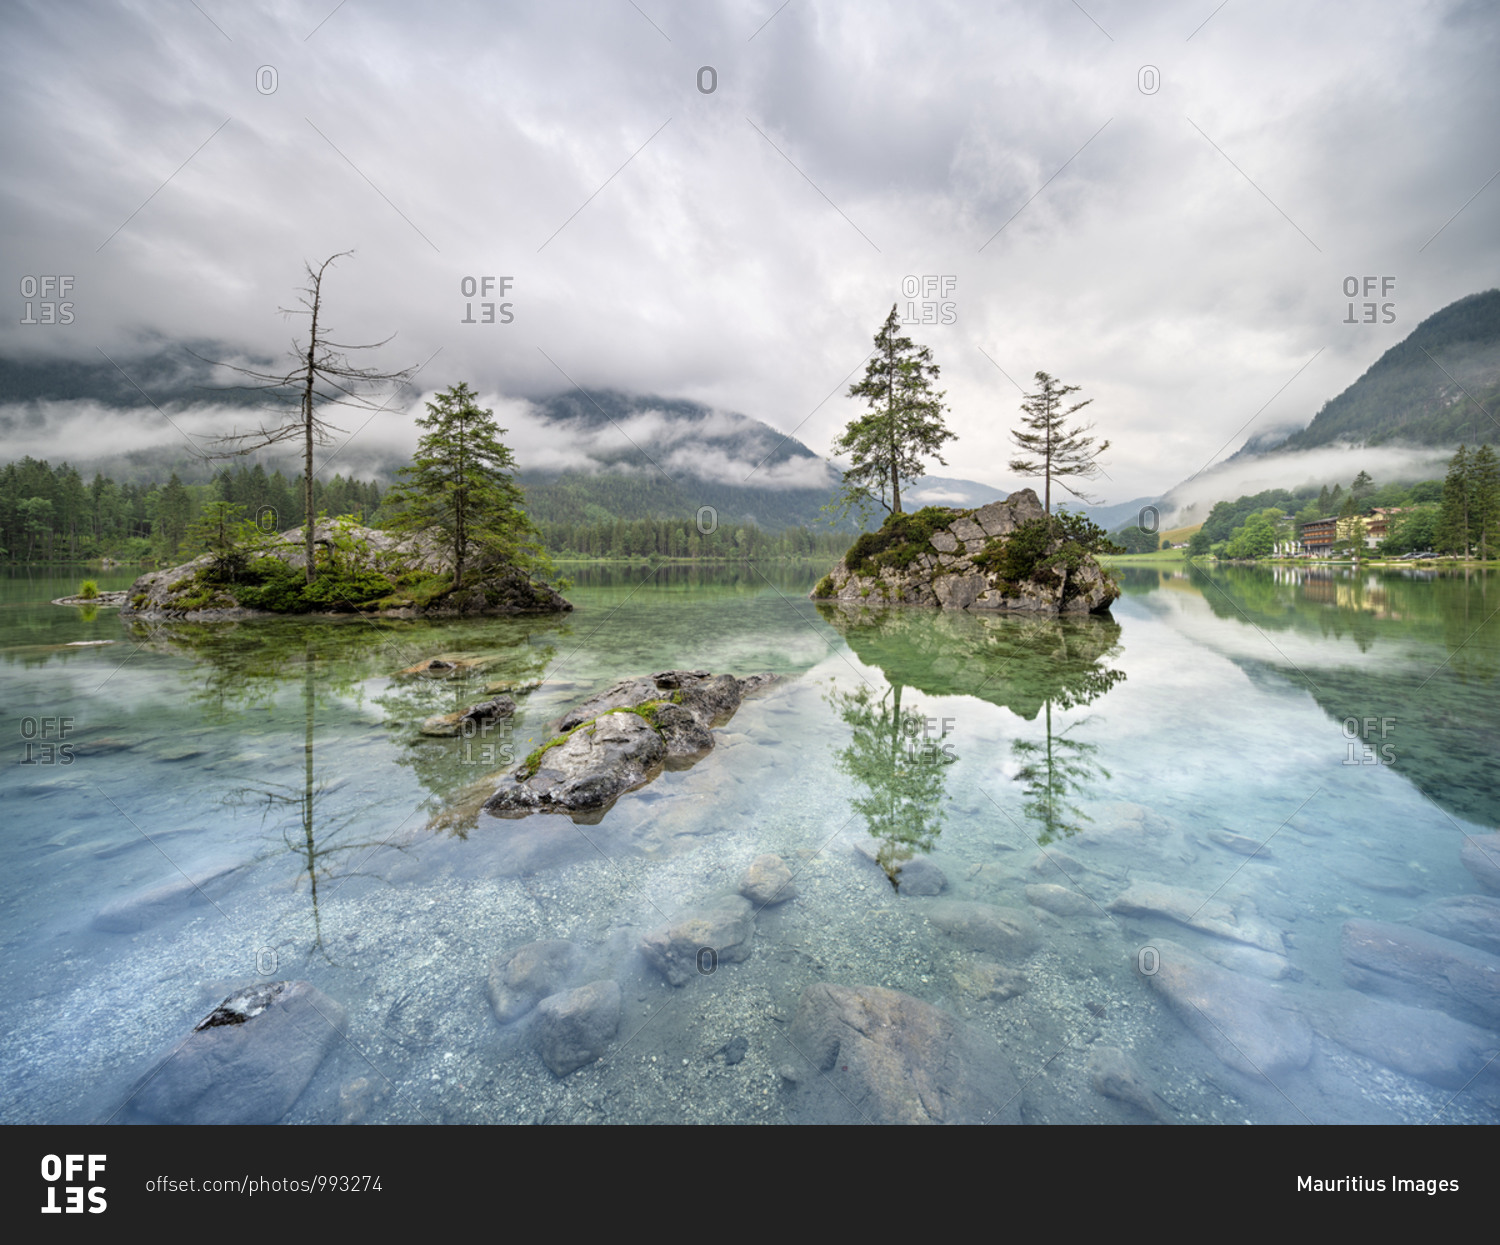 Germany, Bavaria, Berchtesgaden National Park, Am Hintersee, low-hanging rain clouds cover the mountains